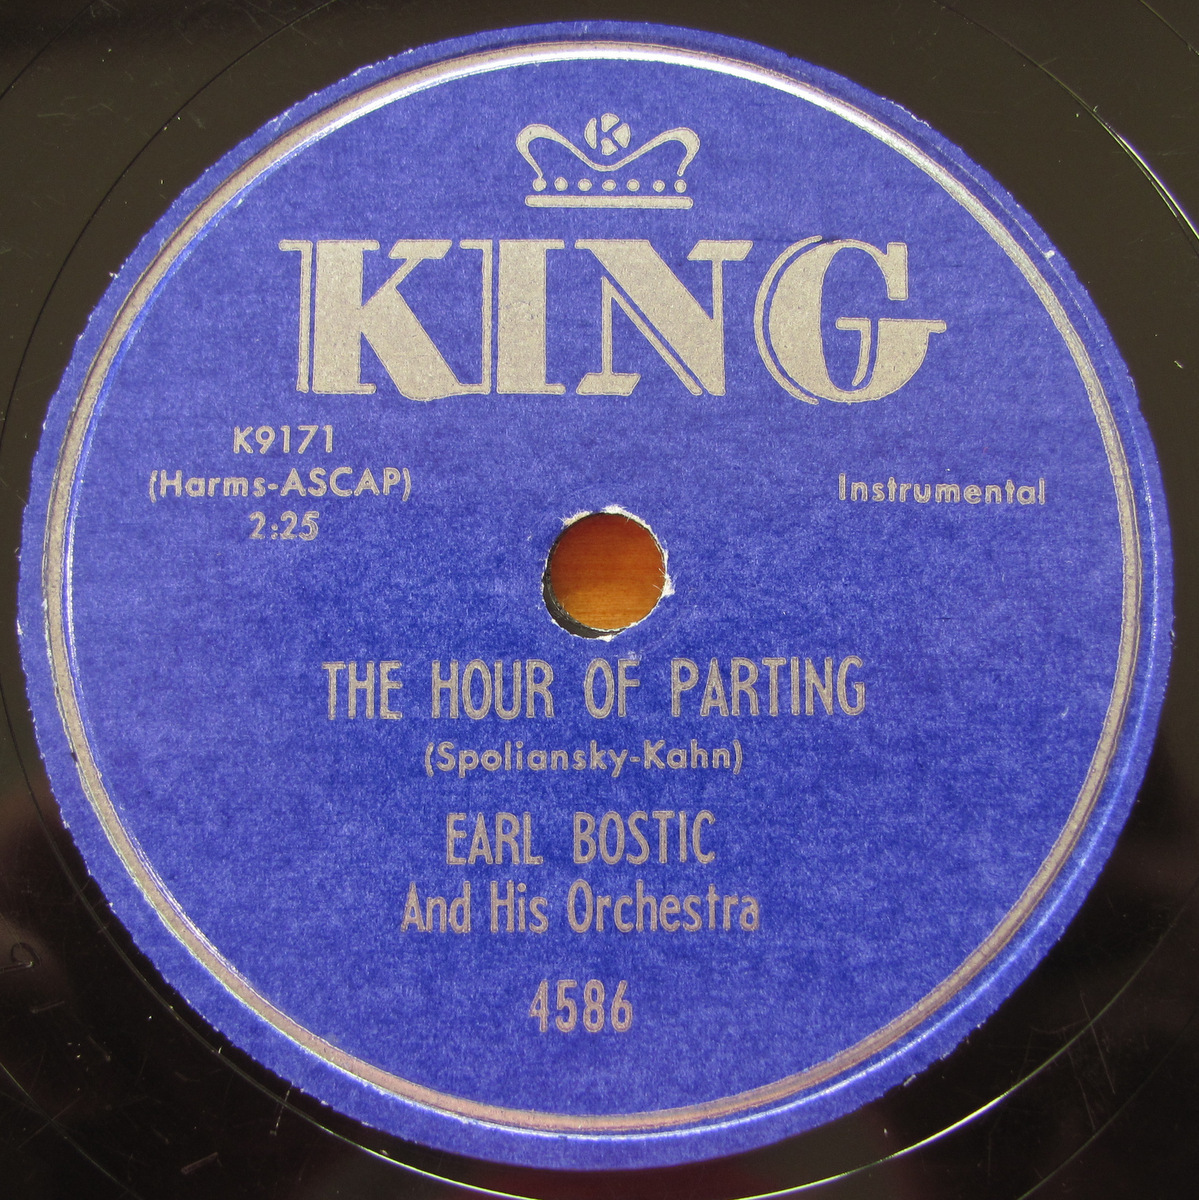 [ запись ]78rpm SP запись KIng 4586 Earl Bostic The Hour Of Parting / You Go To My Head